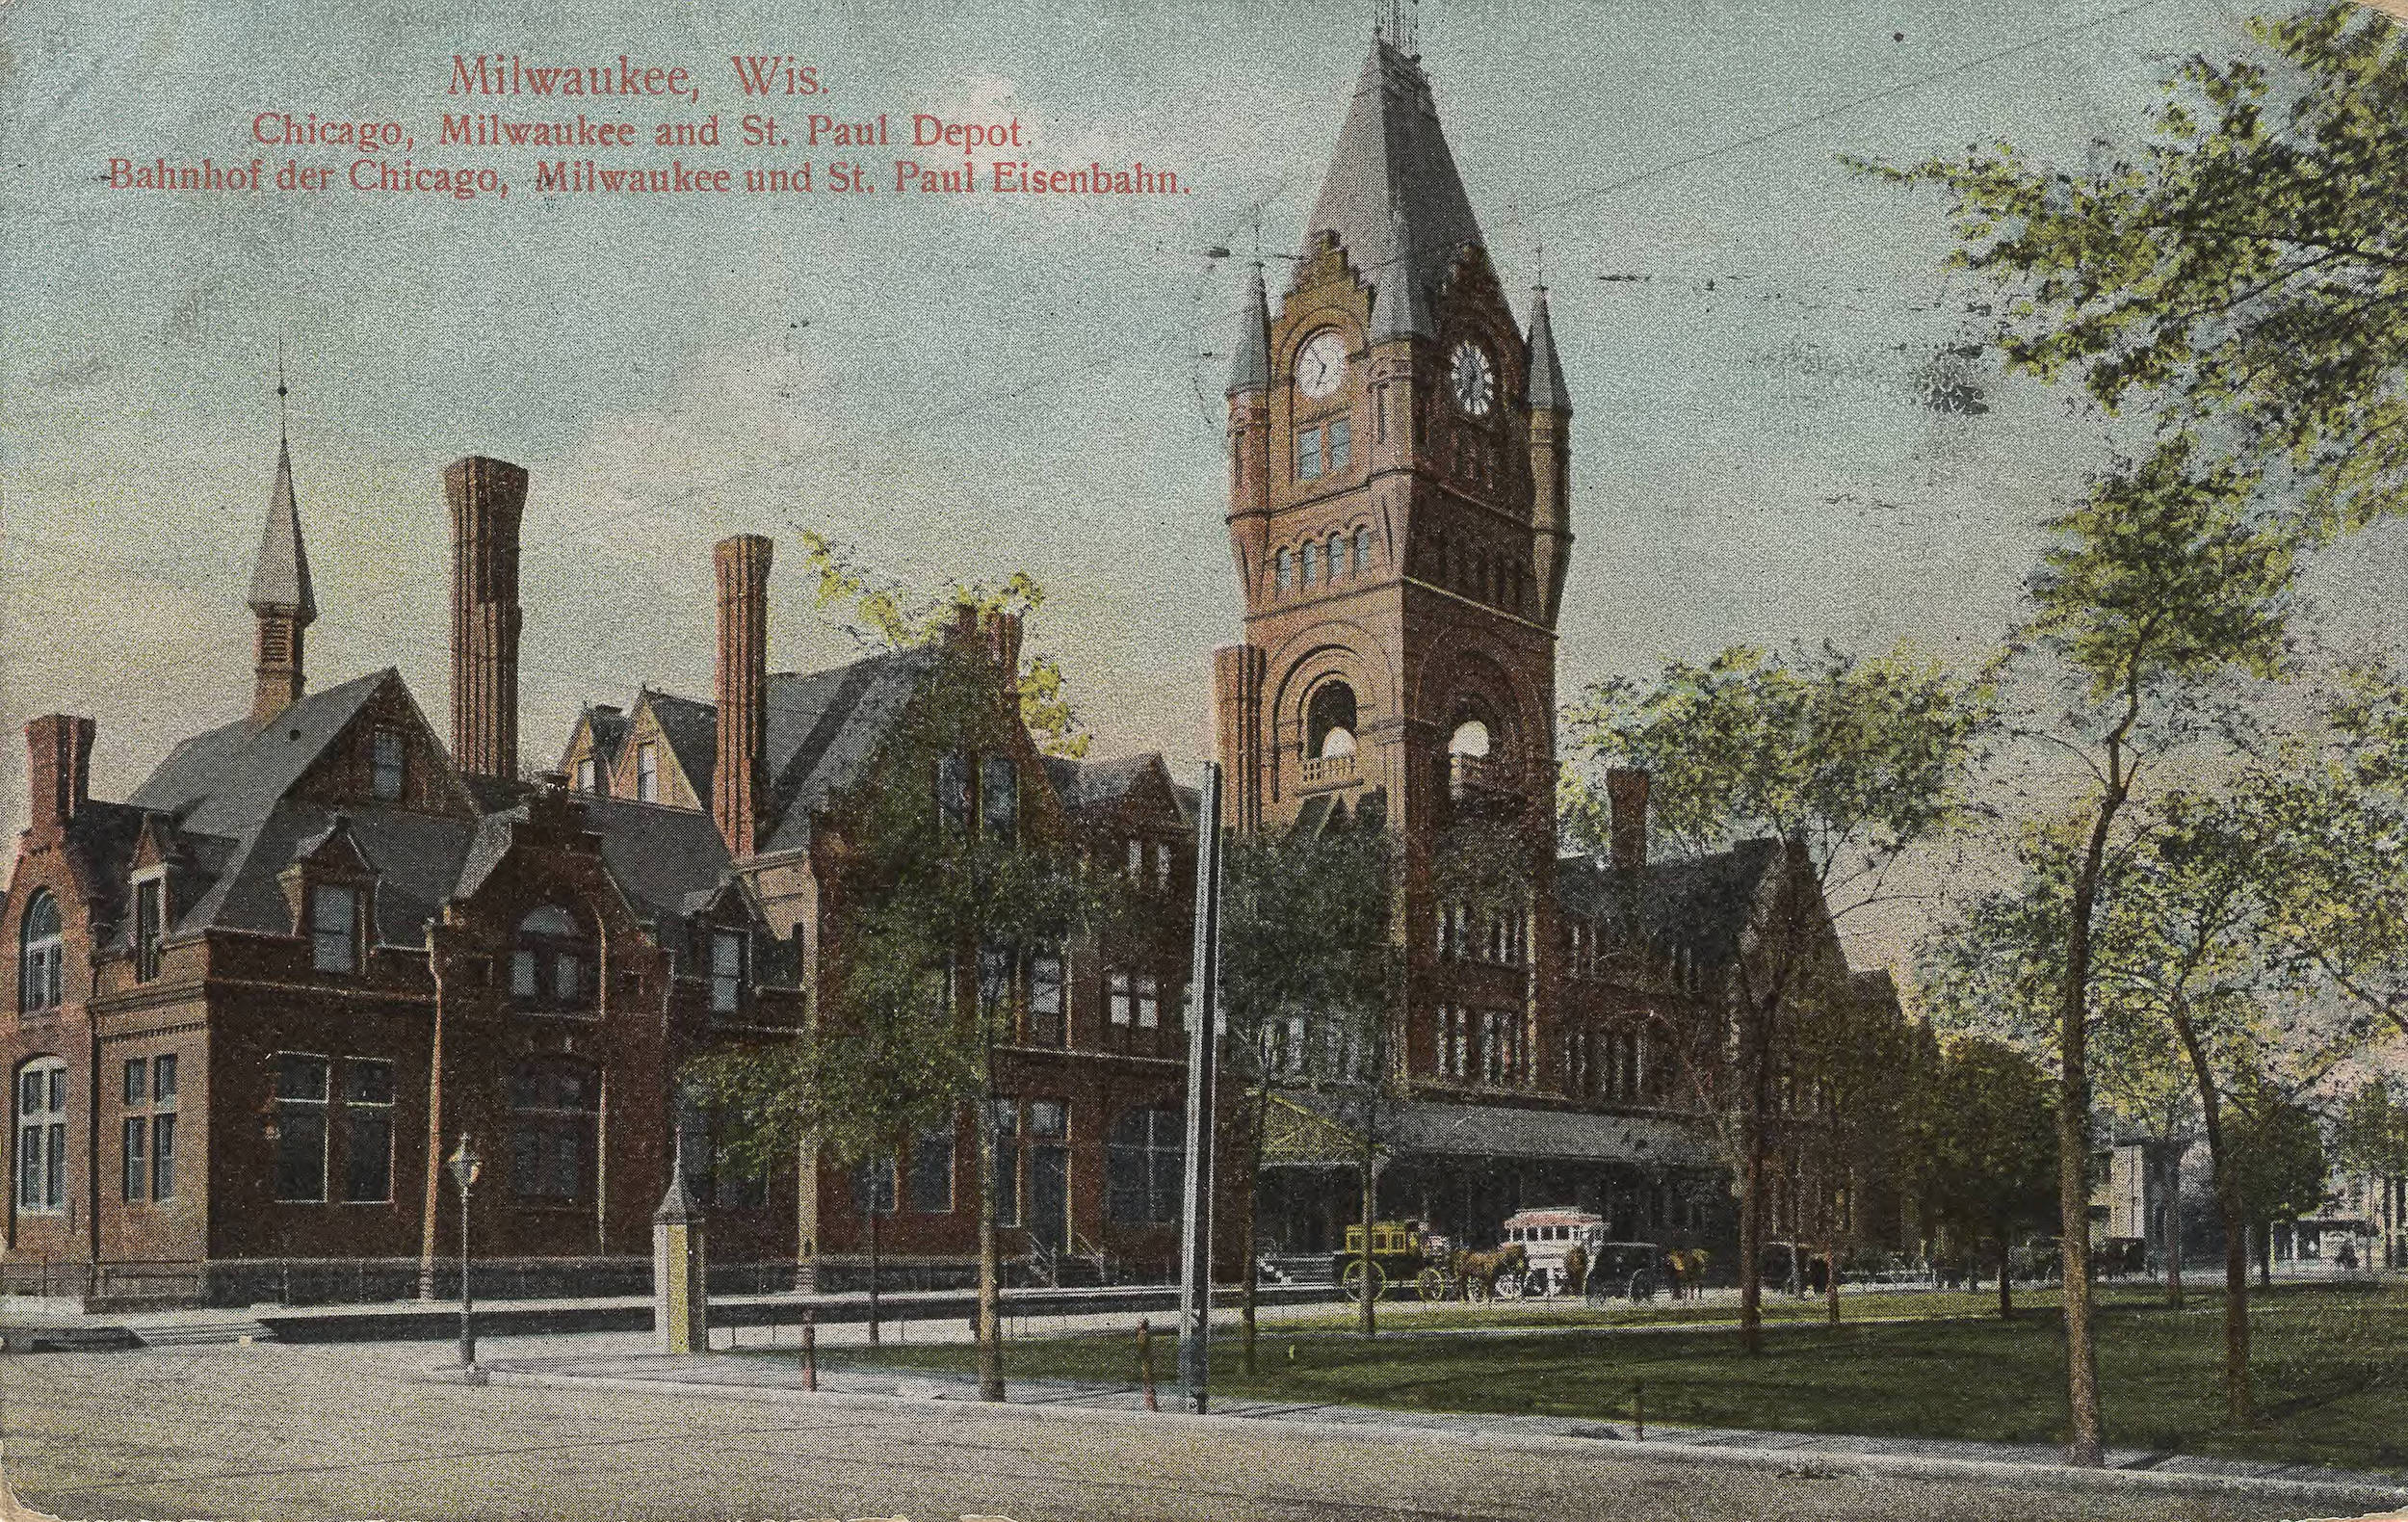 This 1910 postcard showcases the large Milwaukee Road station once located on W. Everett Street. It was designed by prominent architect E. Townsend Mix and first opened in 1886. 